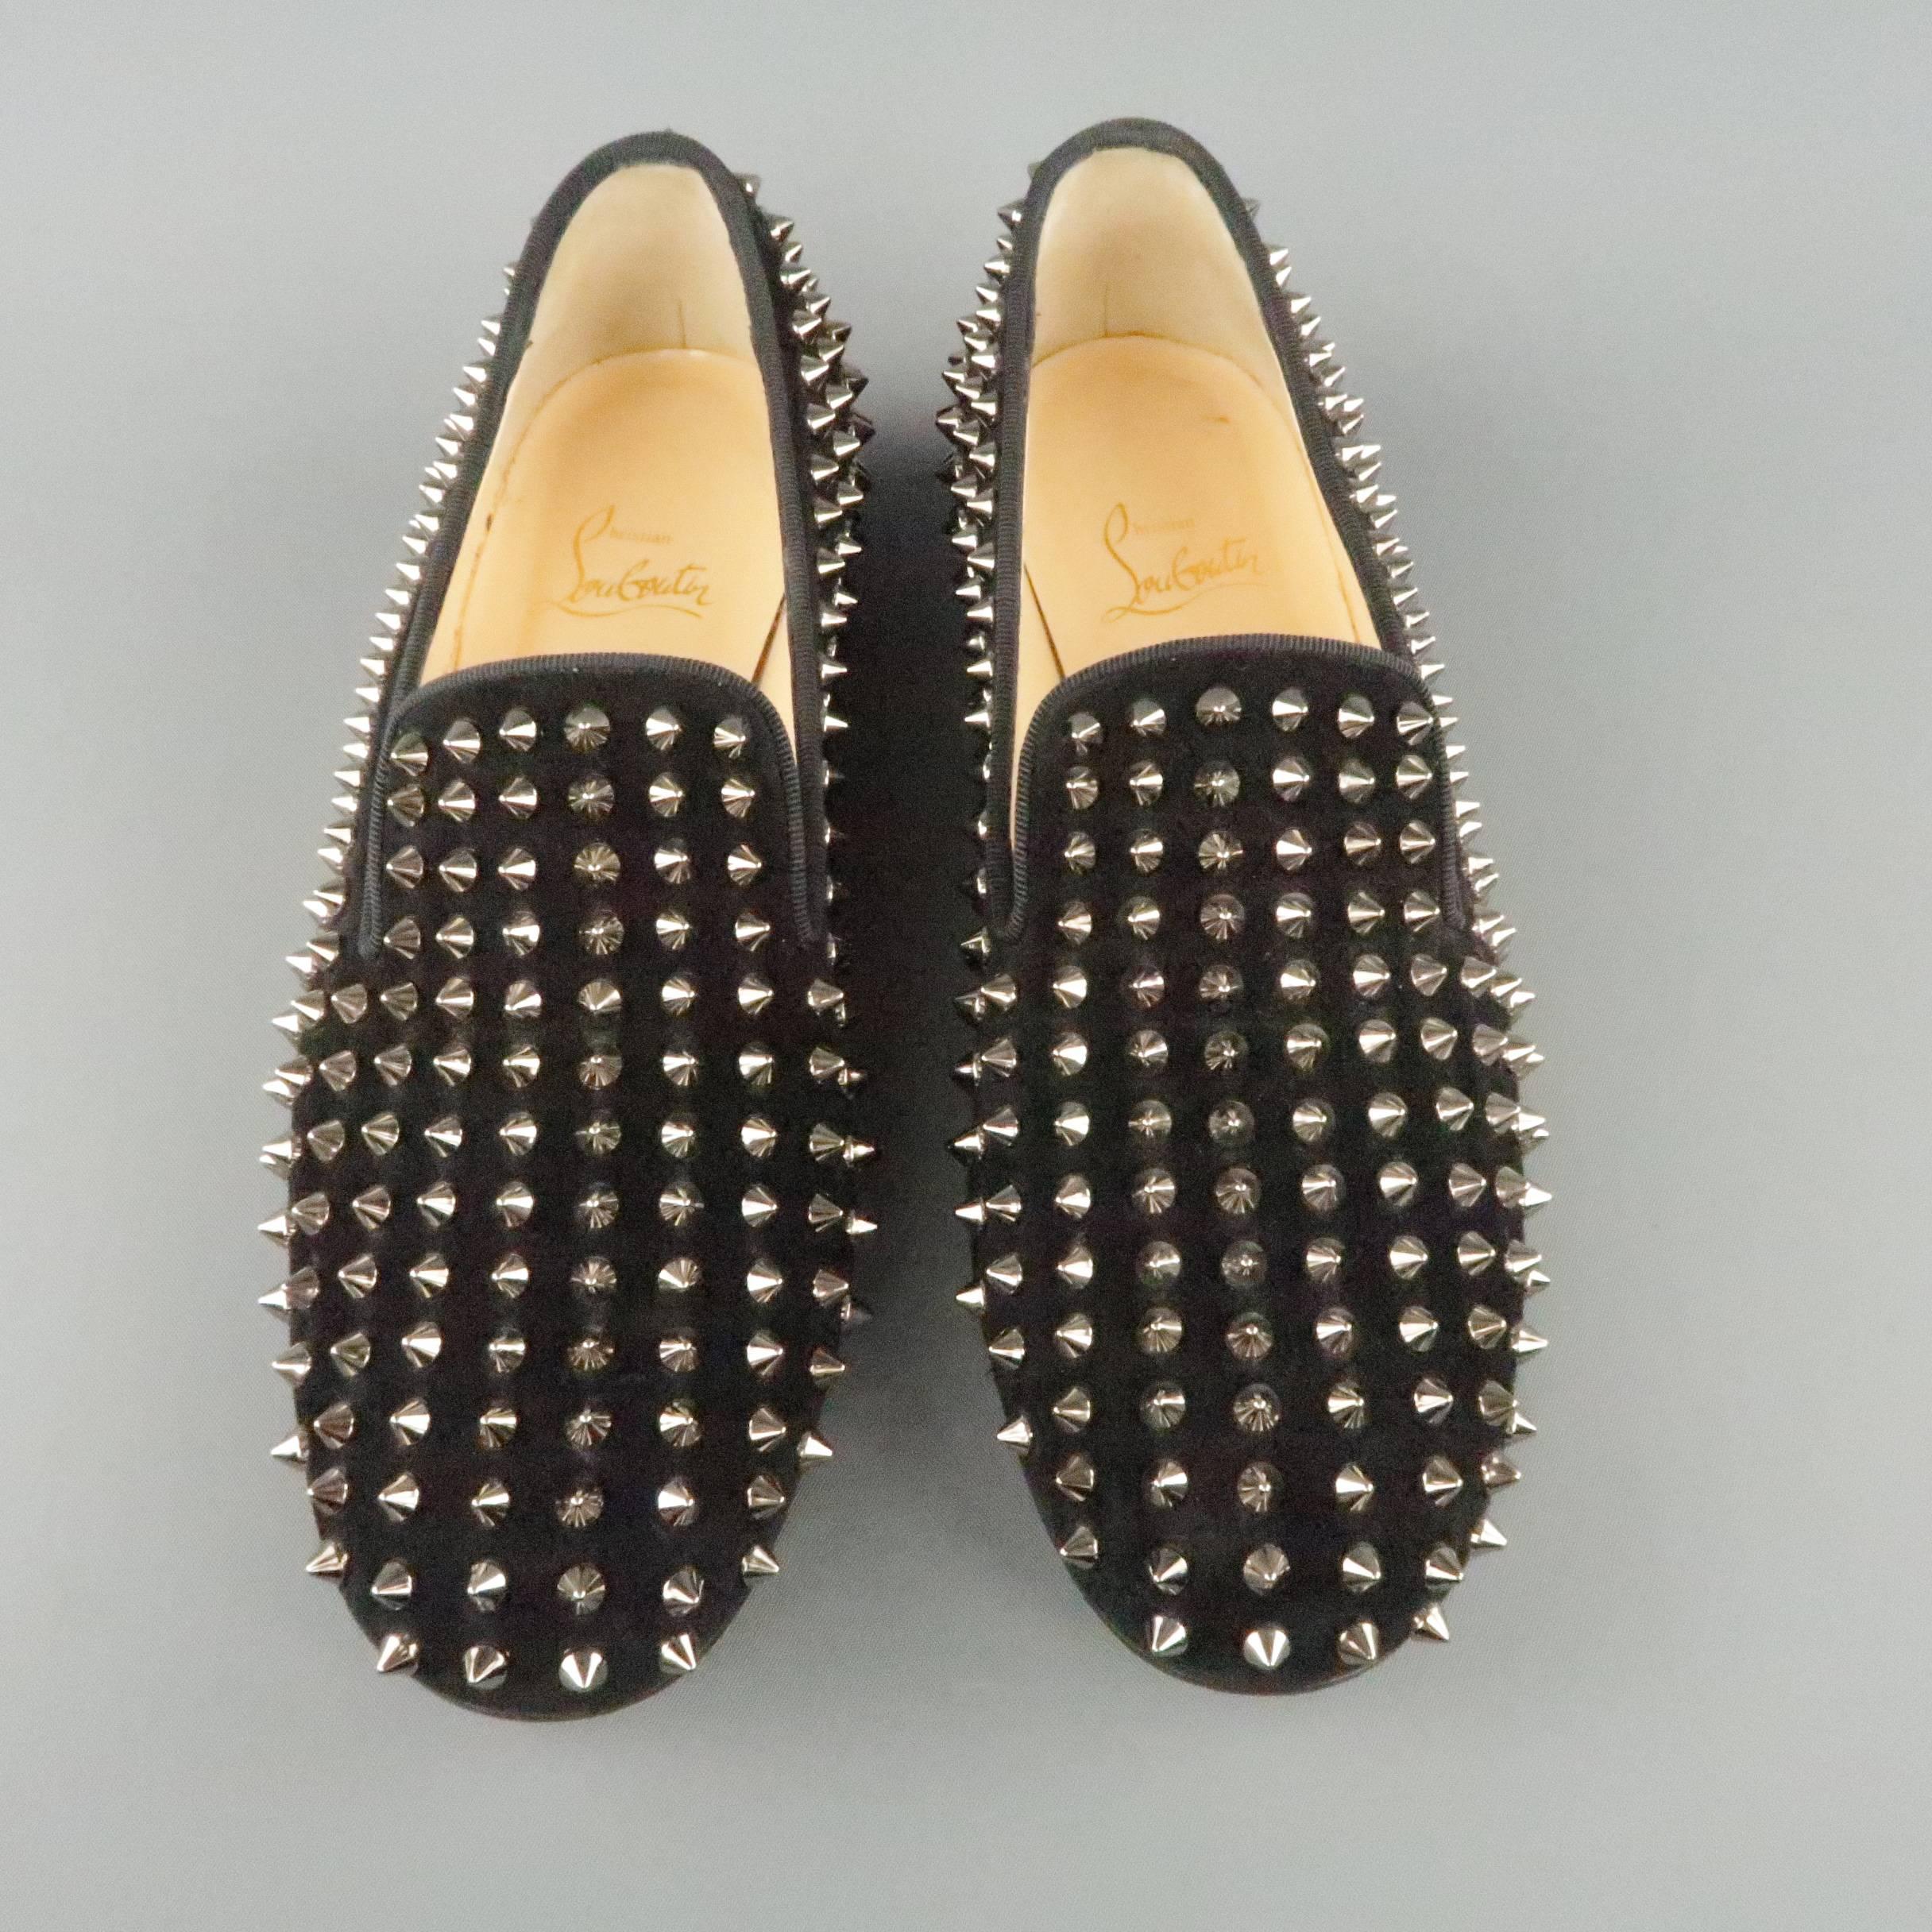 Women's CHRISTIAN LOUBOUTIN Size 8 Black Spiked Suede Rolling Spikes Loafers